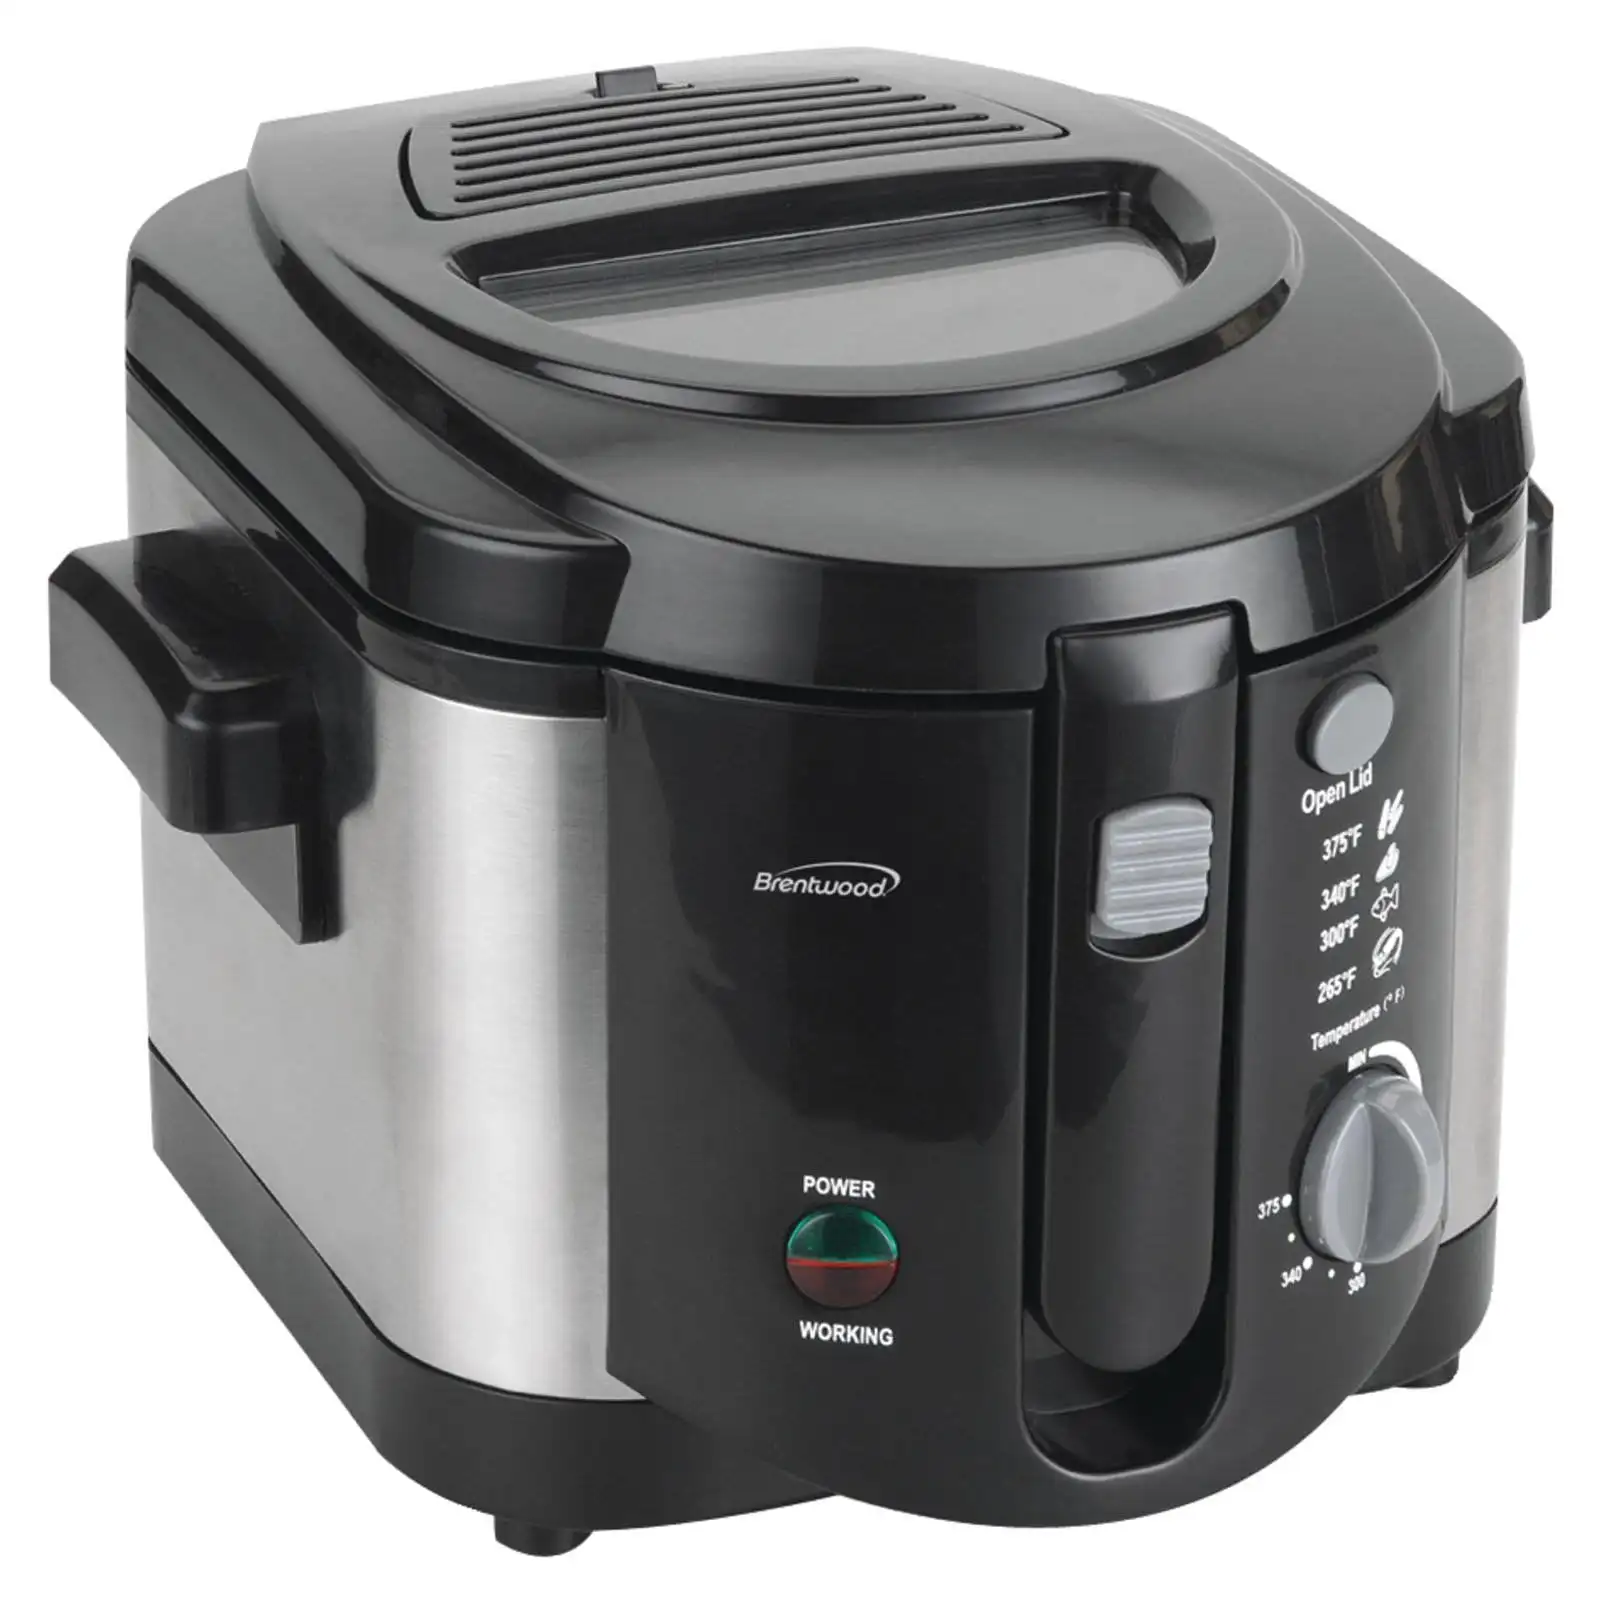 

Brentwood DF-720 1200w 8-Cup Electric Deep Fryer, Stainless Steel